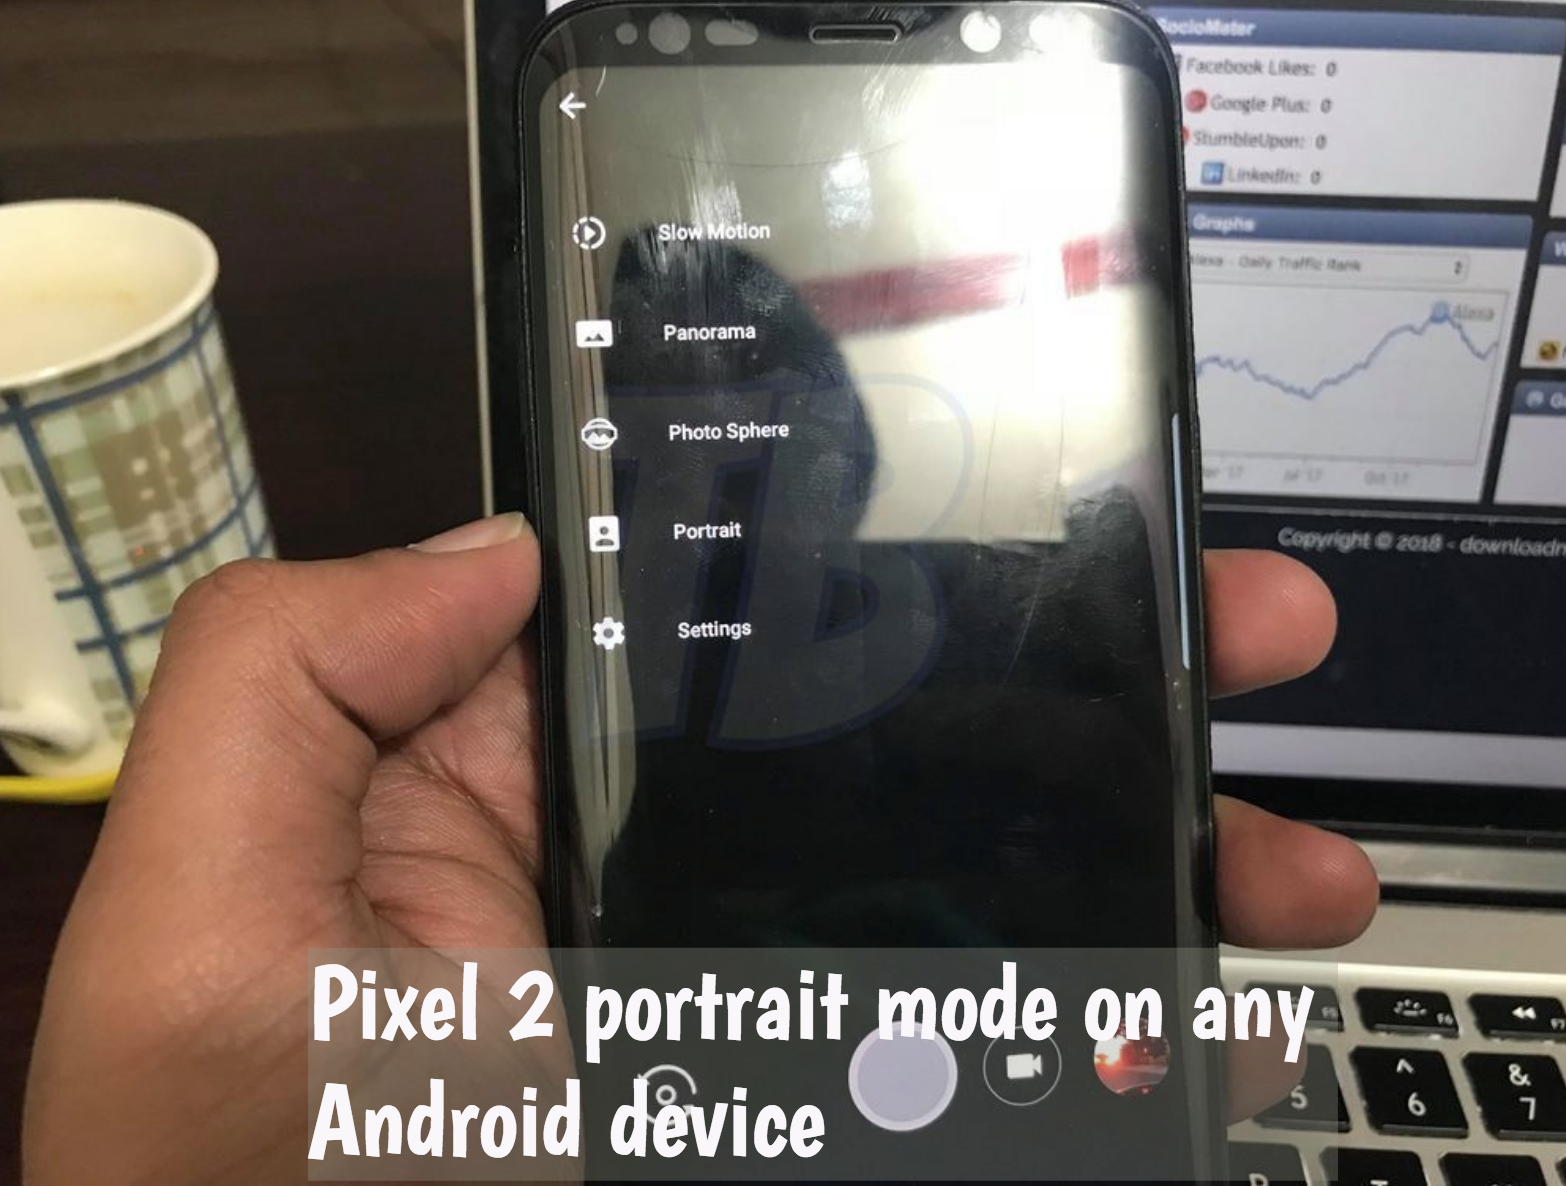 Pixel 2 portrait mode on any Android device